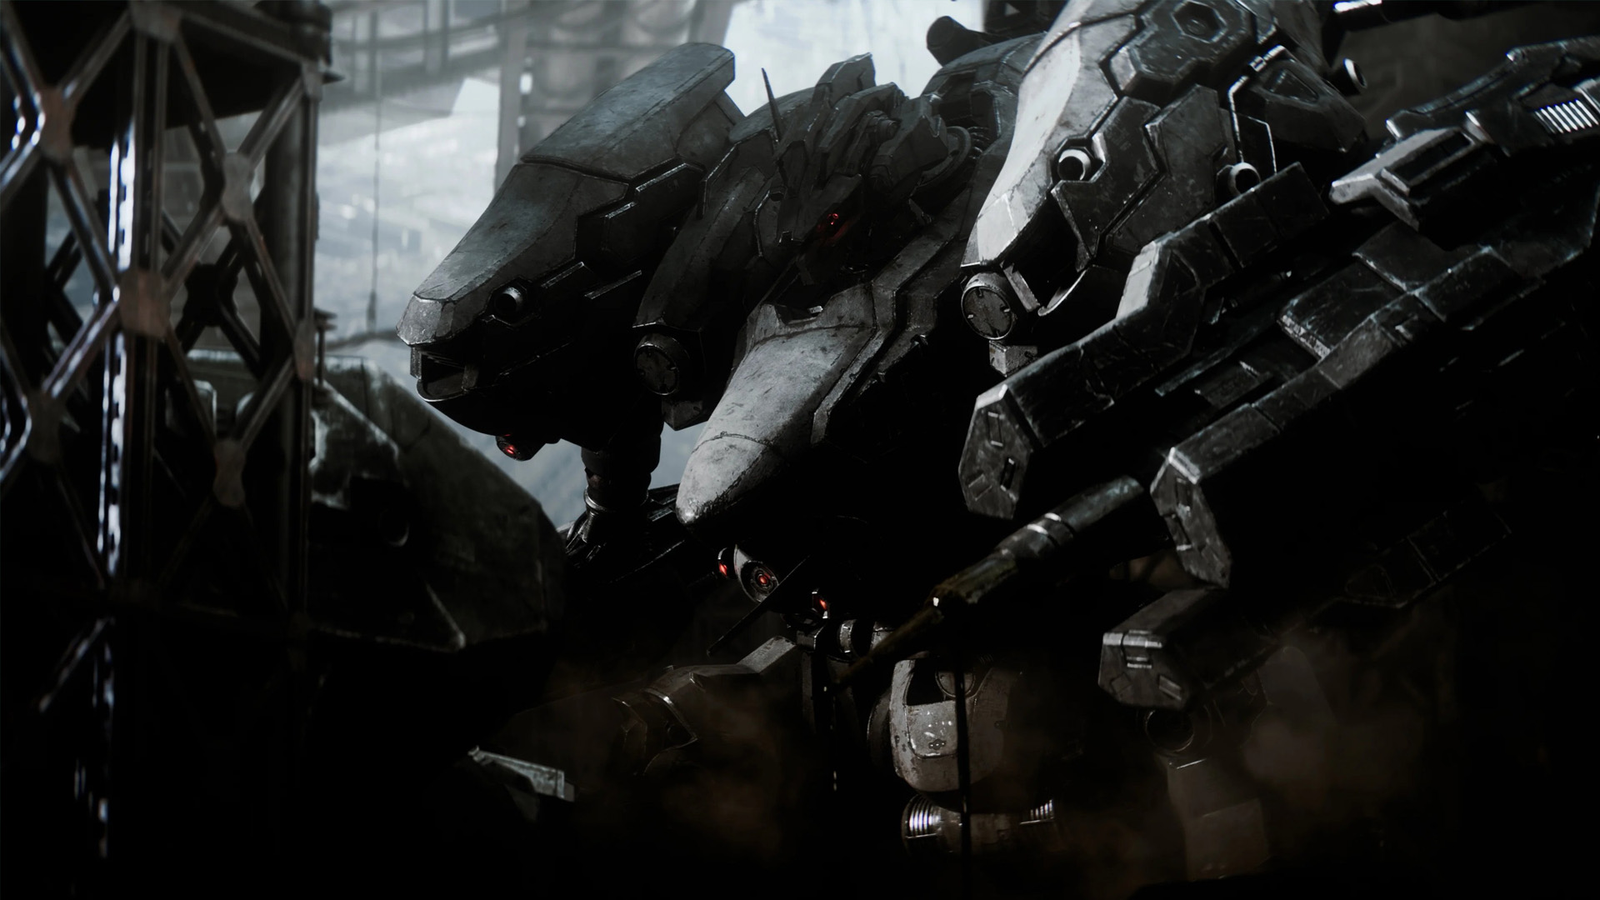 Armored Core VI: Fires of Rubicon 'Gameplay Footage' trailer - Gematsu